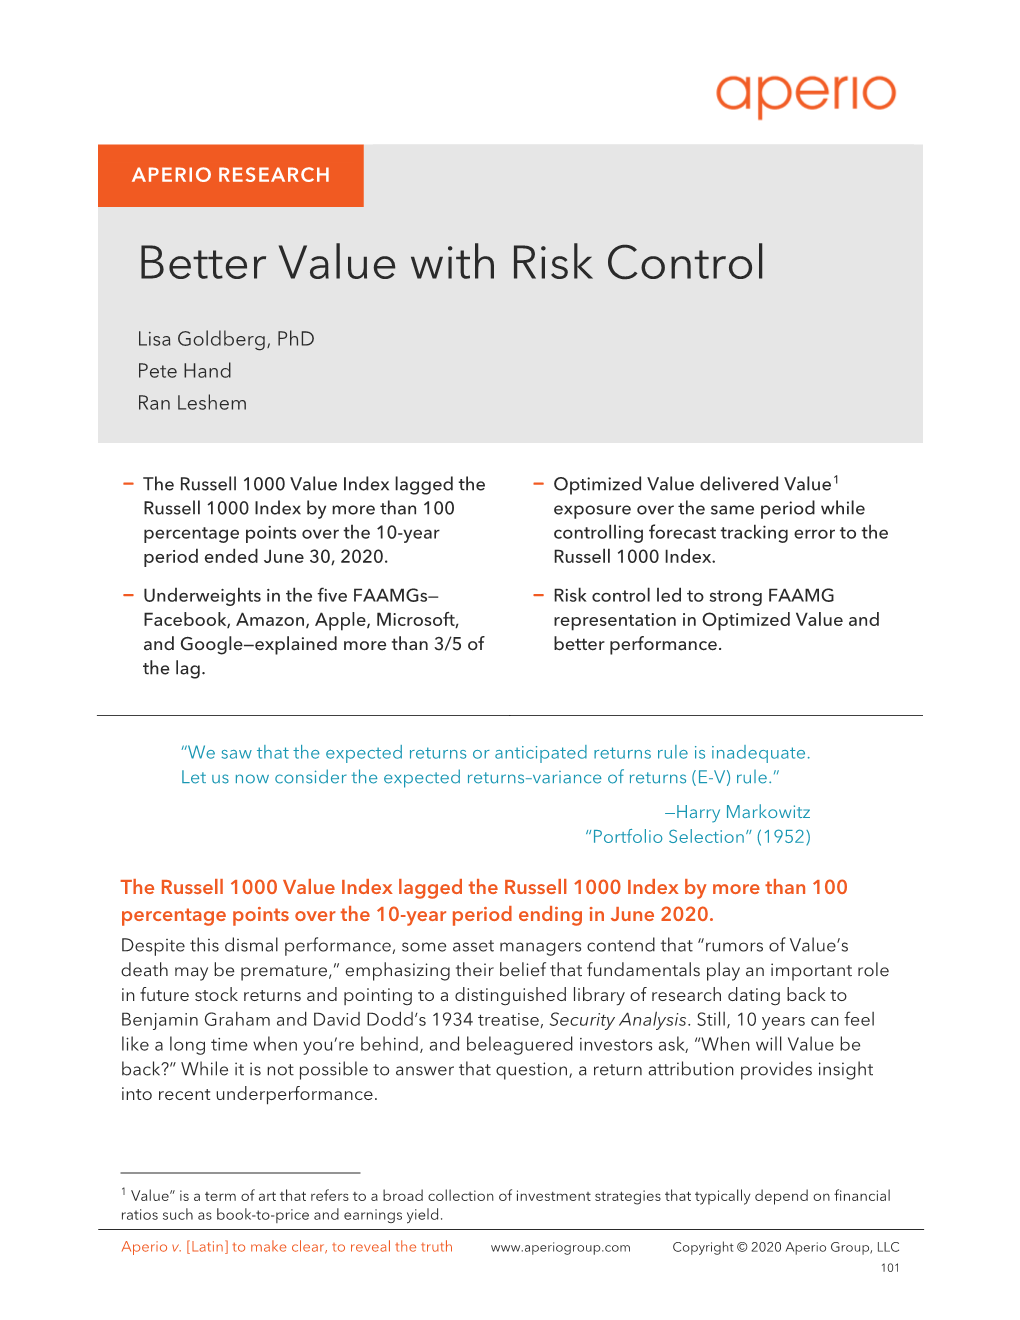 Better Value with Risk Control